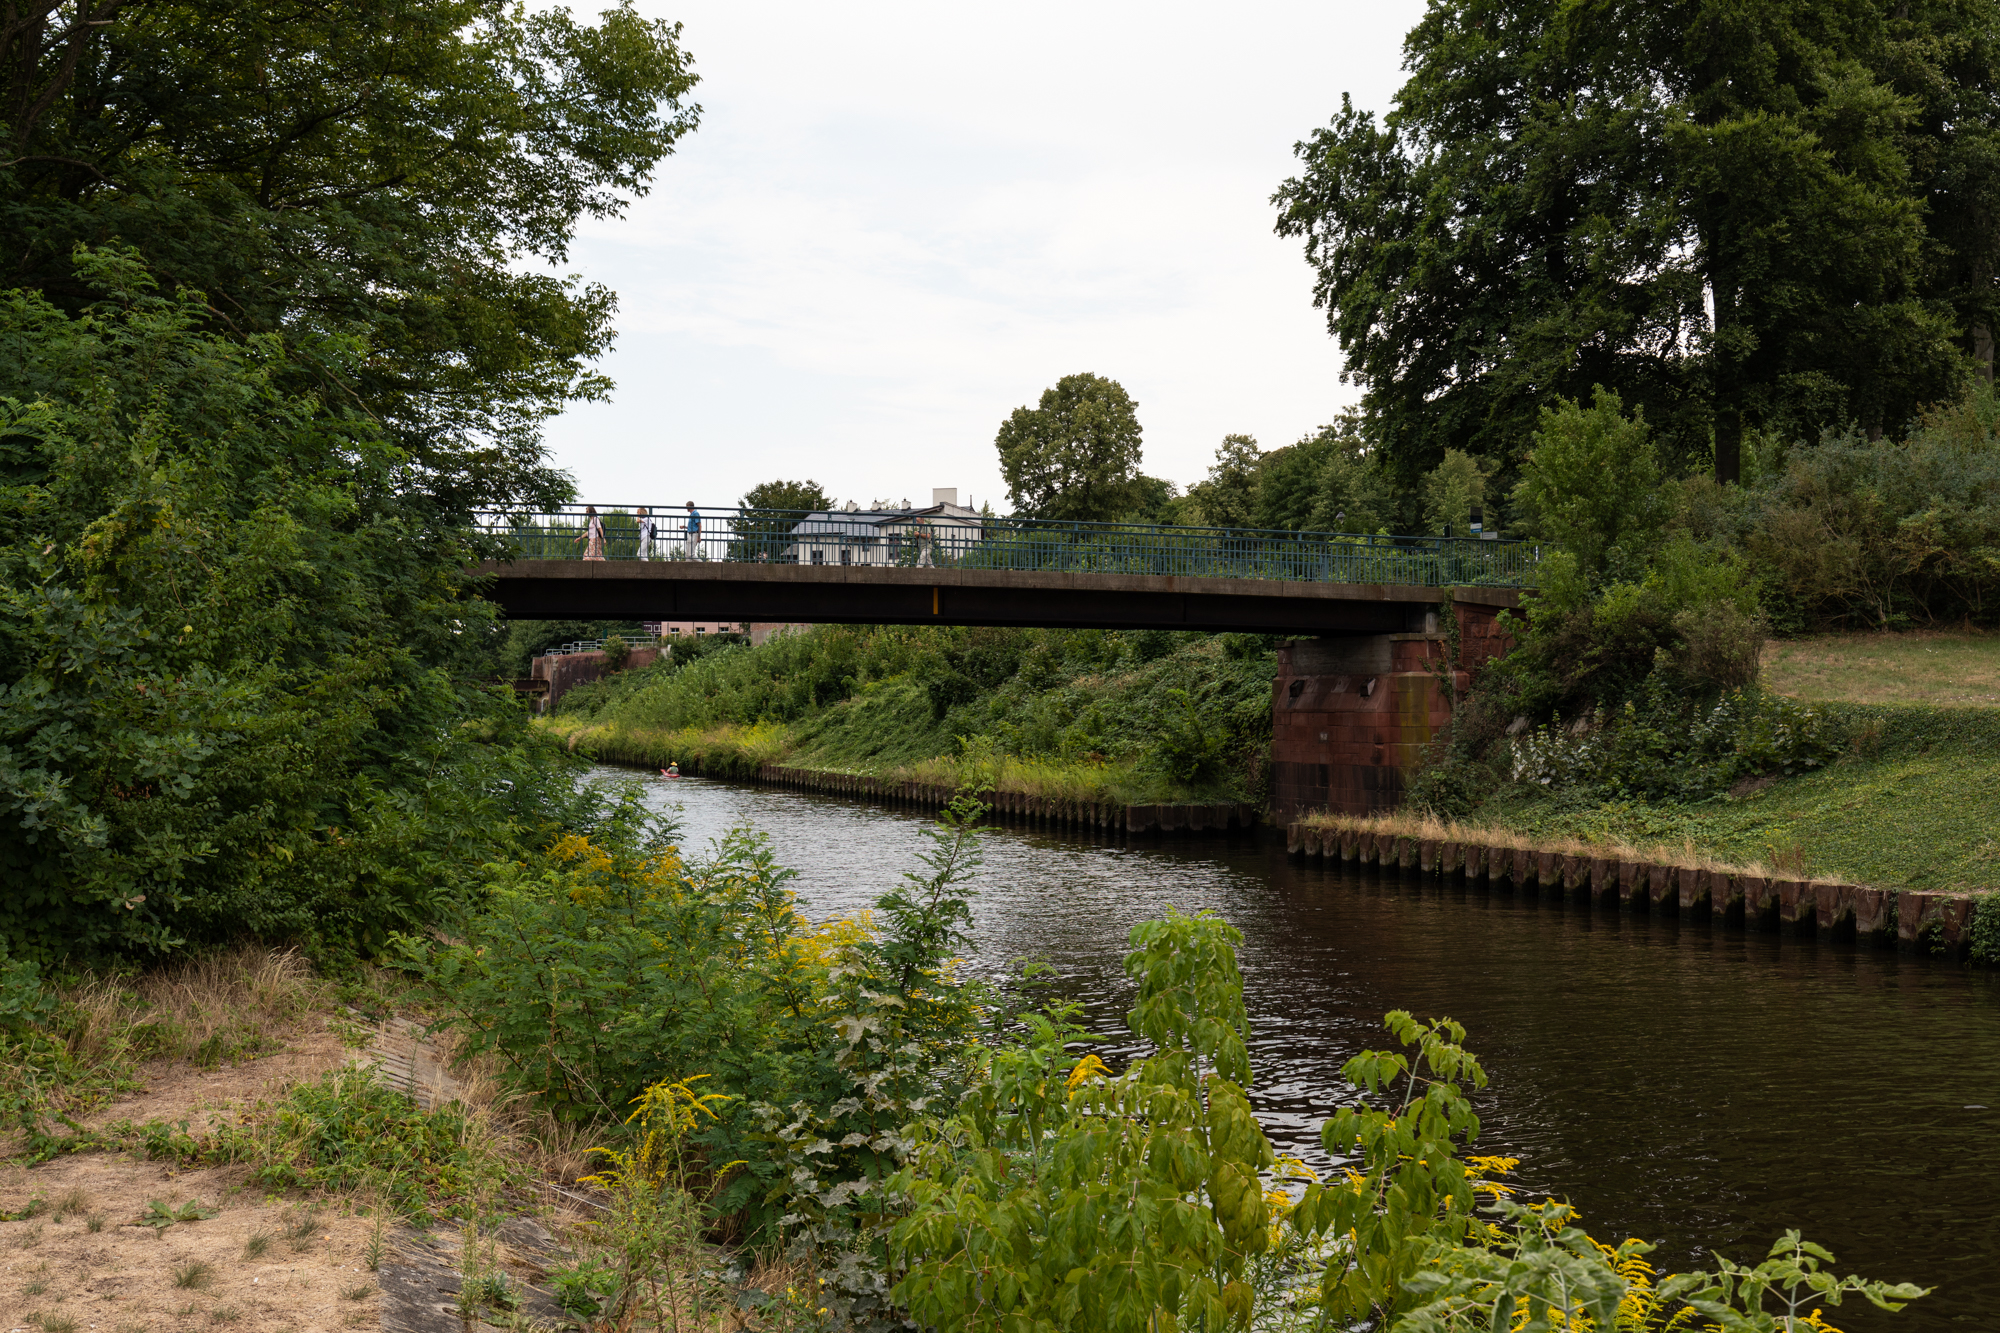 Bridge between Park Babelsberg and Klein Glienicke - a former East German enclave separated from West Berlin by the Berlin Wall and only accessible with special permission